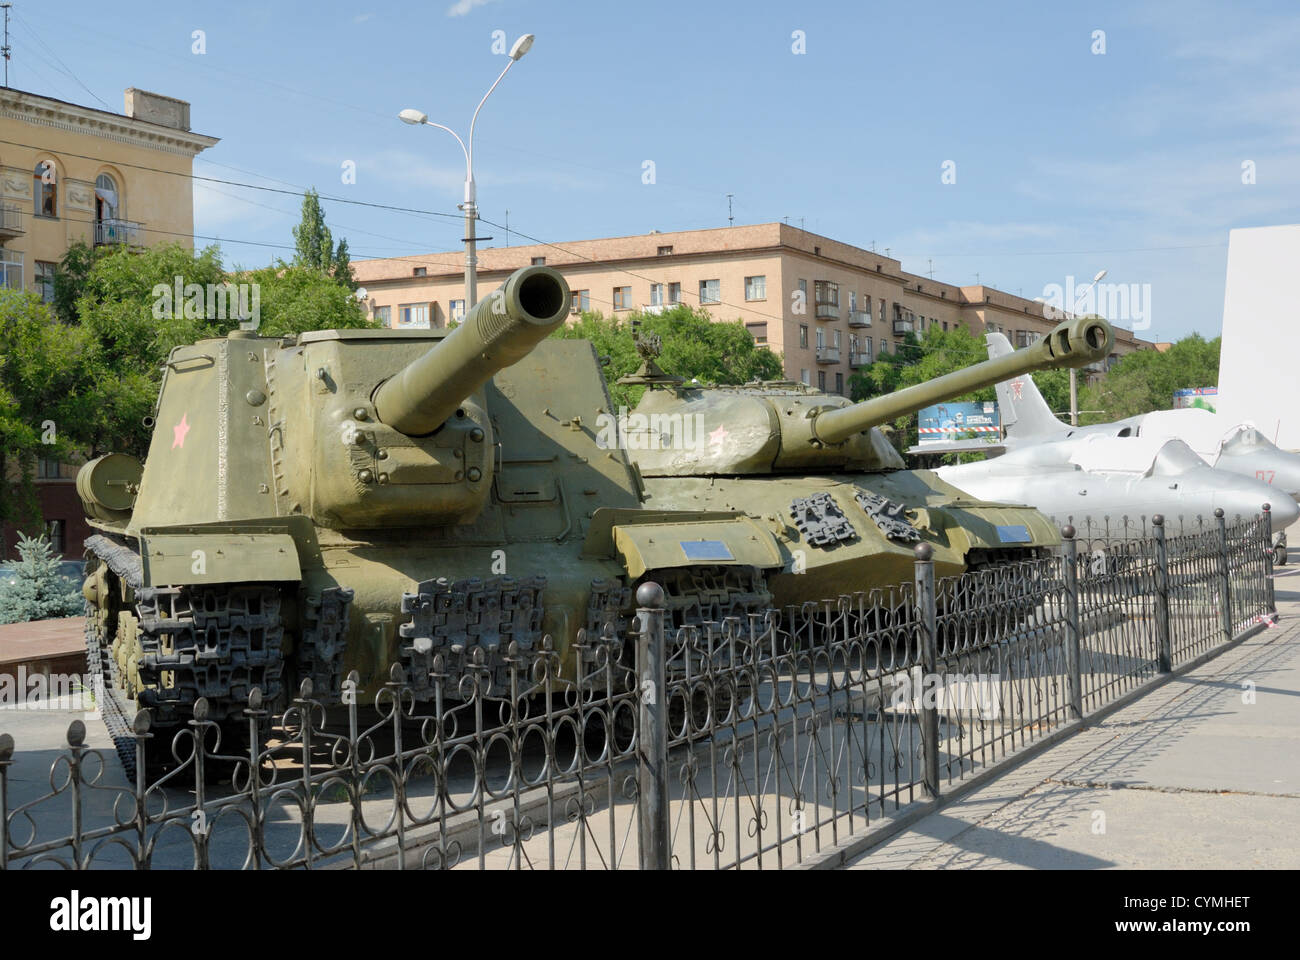 The weapon of a victory. The heavy tank and self-propelled installation of times of the second world war. Stock Photo